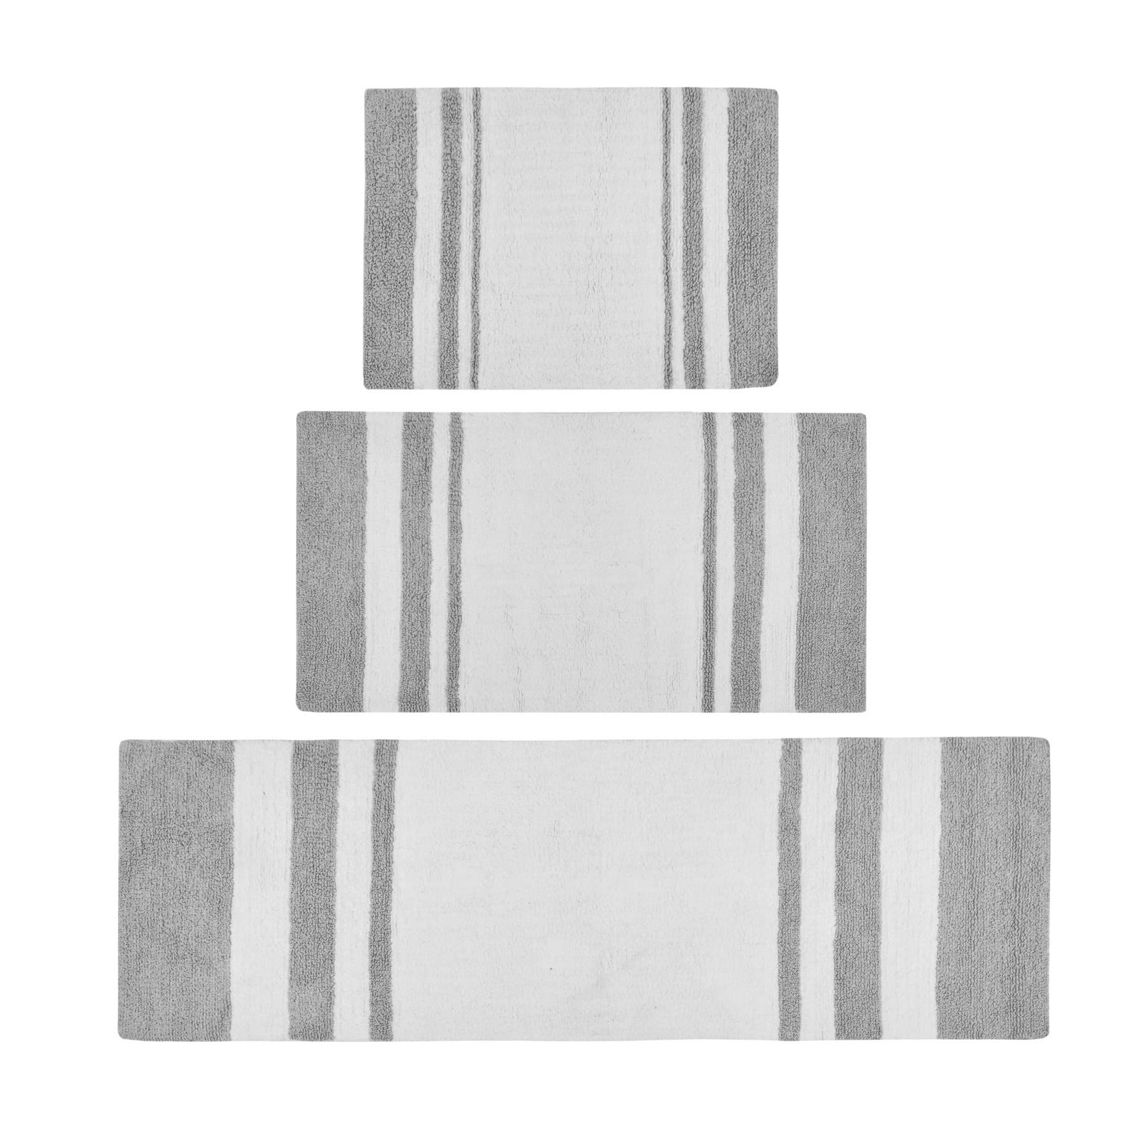 Madison Park Spa Cotton Reversible Bath Rug 24 X 72 in. - Image 2 of 5